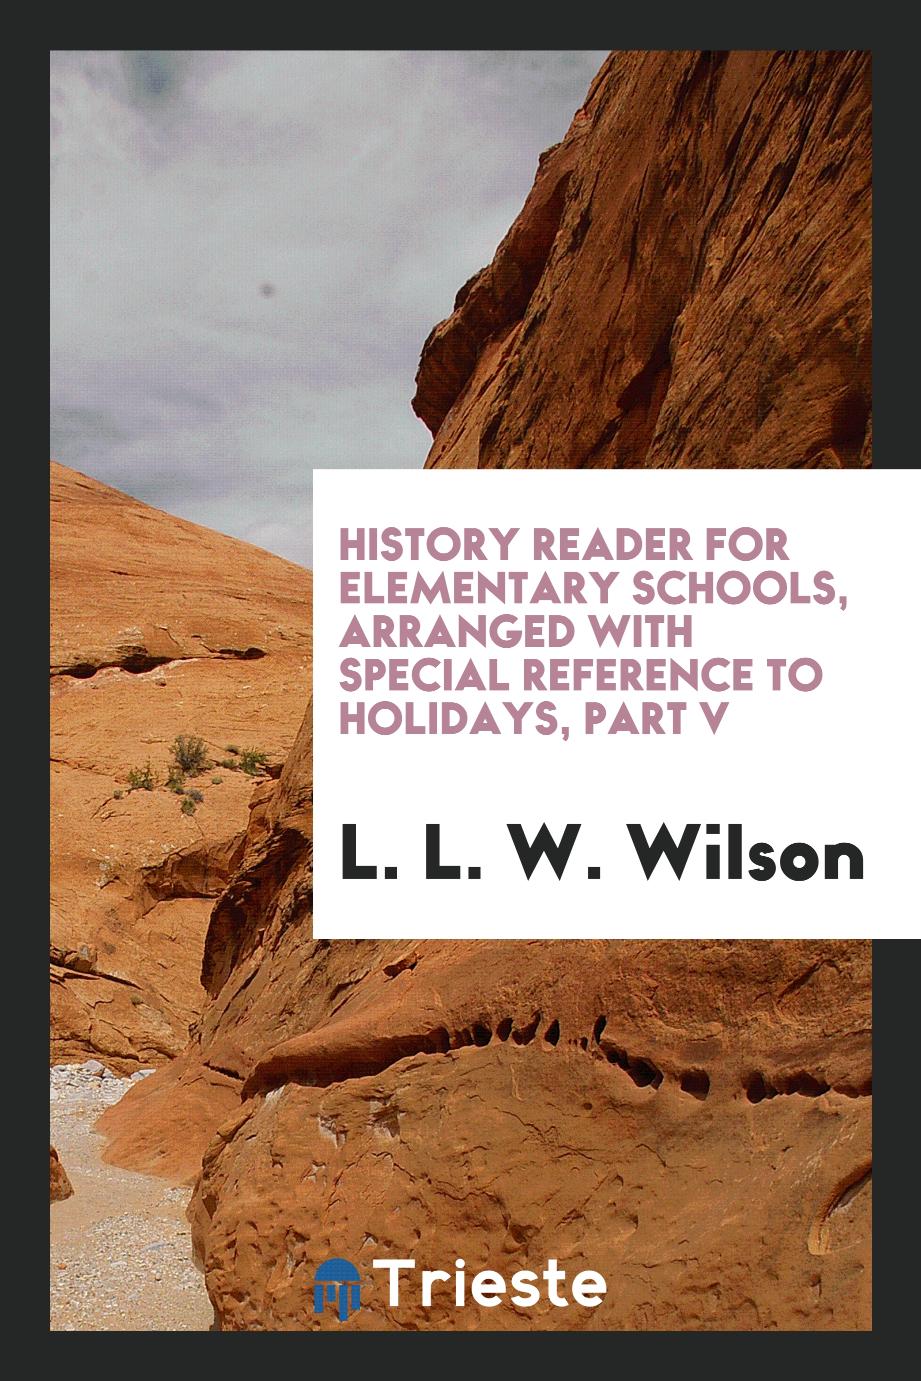 History reader for elementary schools, arranged with special reference to holidays, Part V